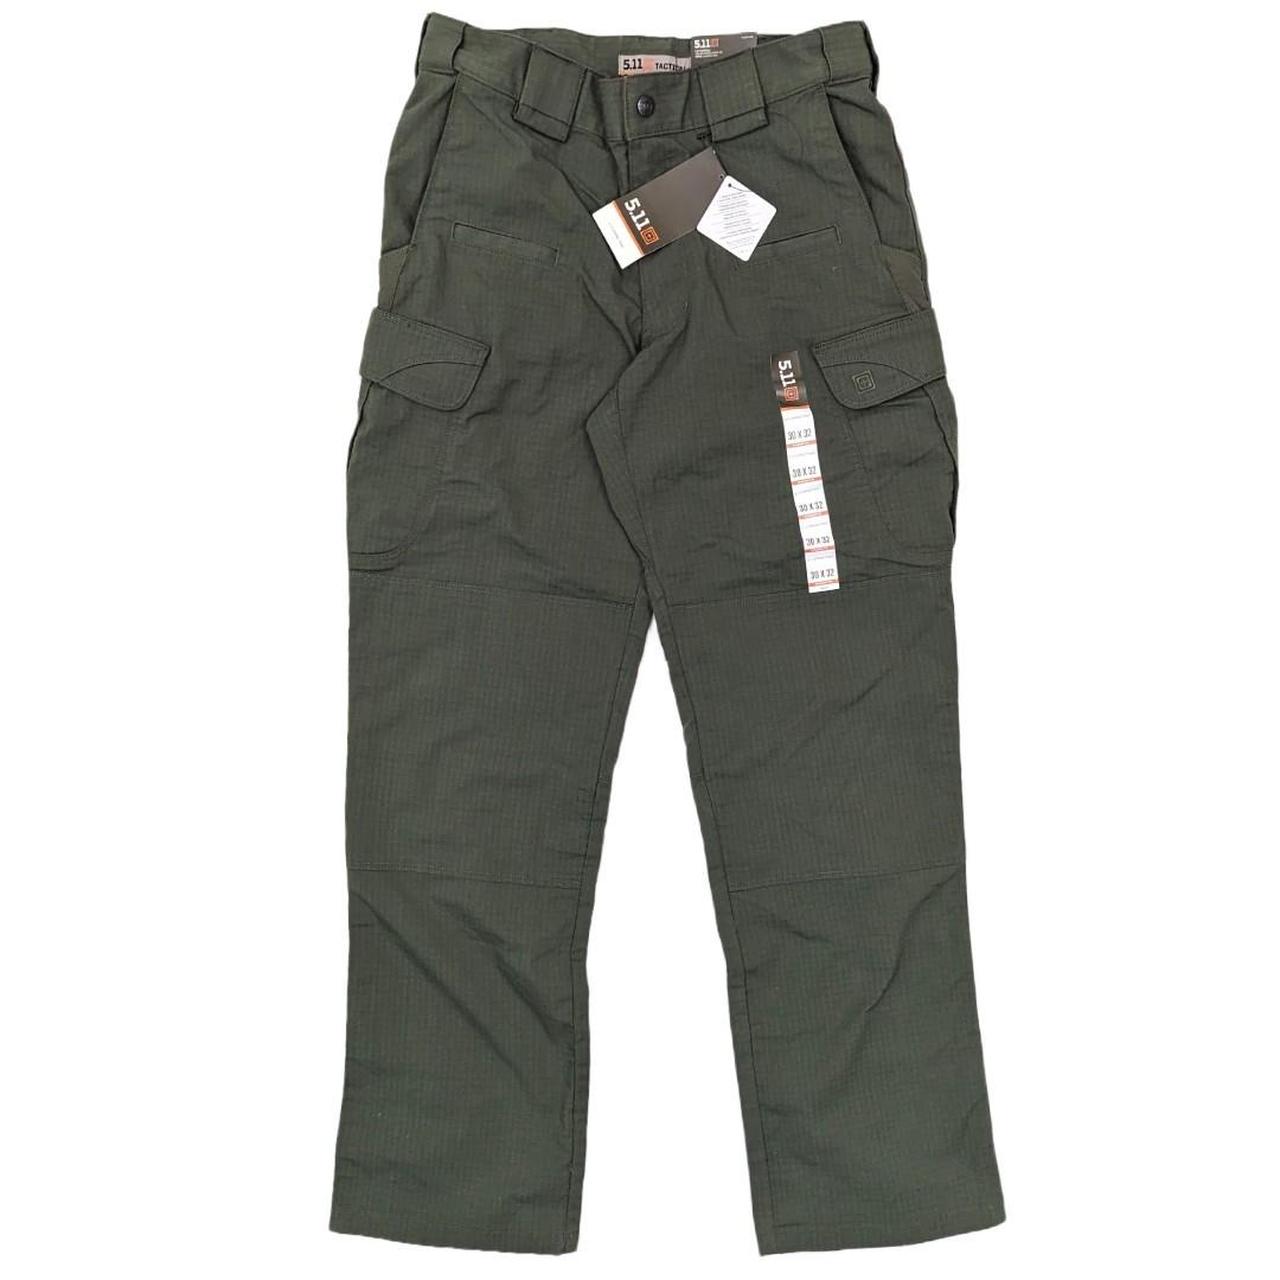 5.11 TDU Pants / Trousers With Ripstop Fabric Black | UK Tactical